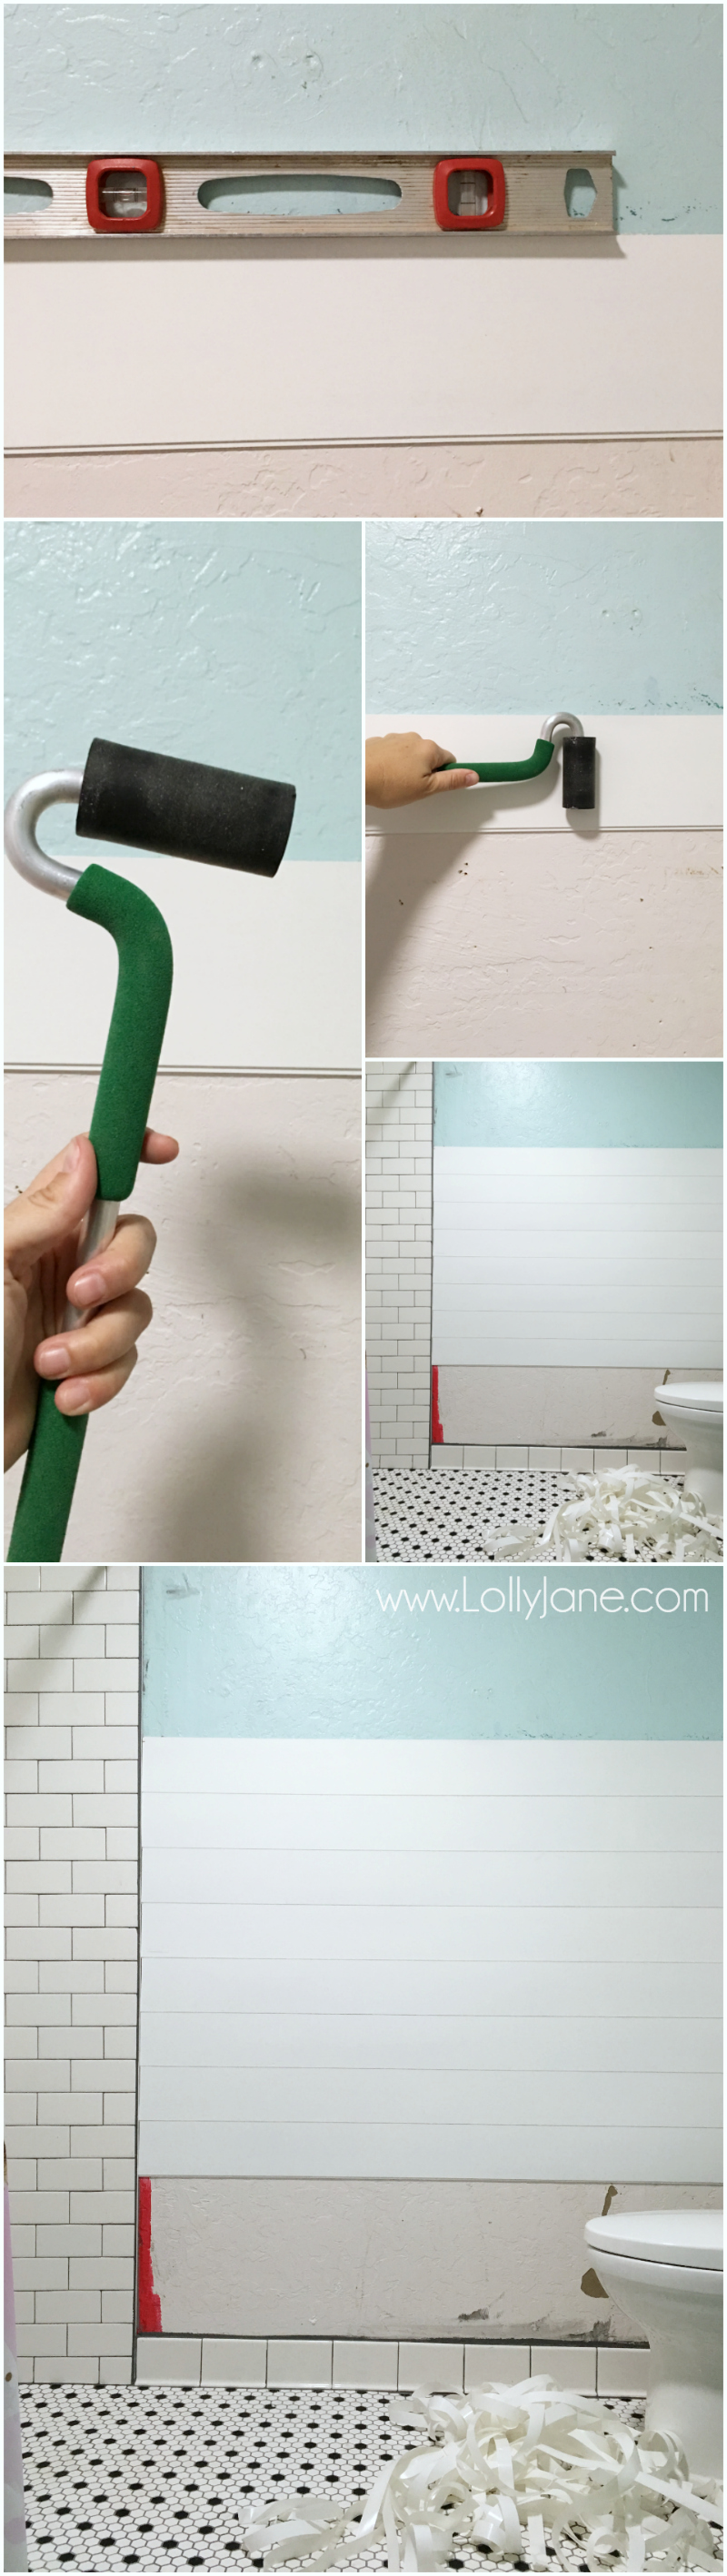 How to install peel and stick shiplap wall treatment. This peel and stick shiplap is so easy to apply, just cut to size and press to wall. Fun farmhouse bathroom remodel ideas!